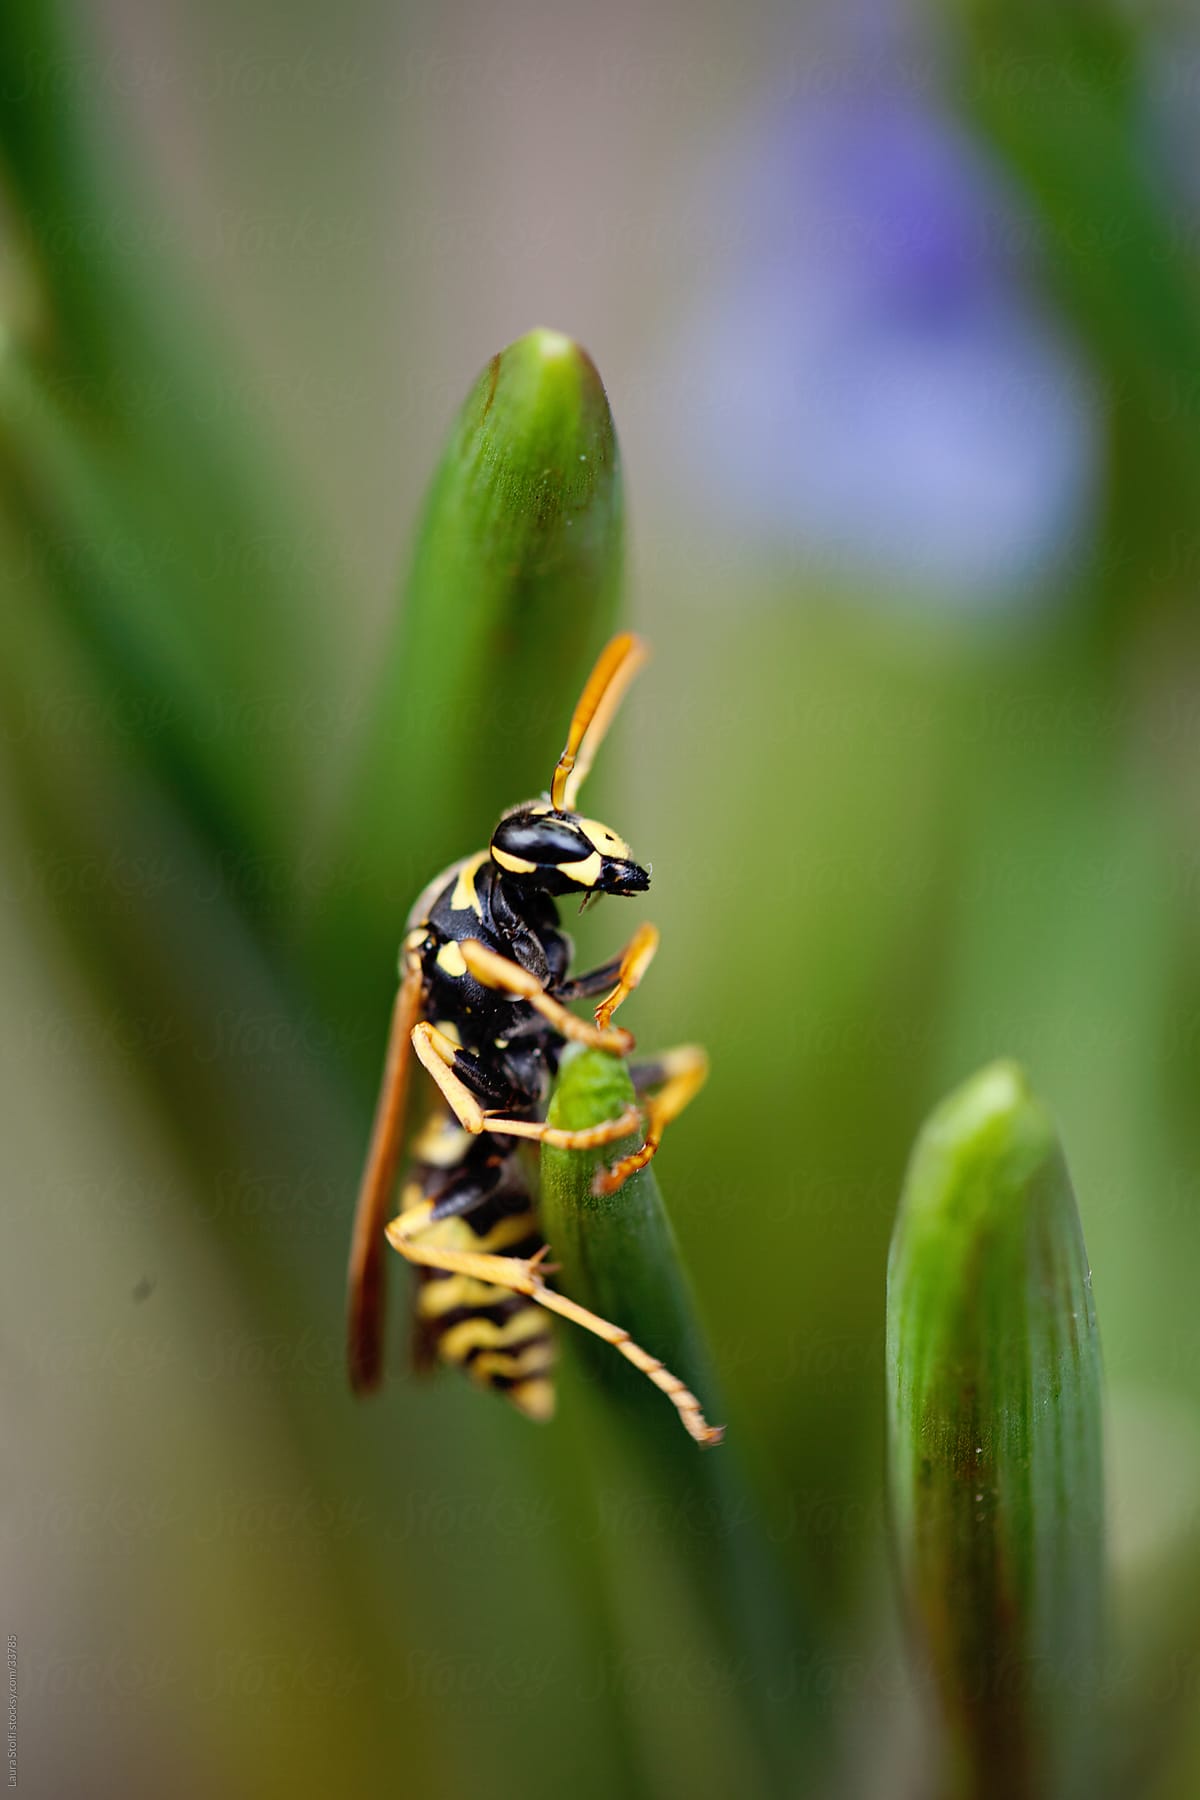 Macro catch of wasp clung on Grape hyacinth leaf